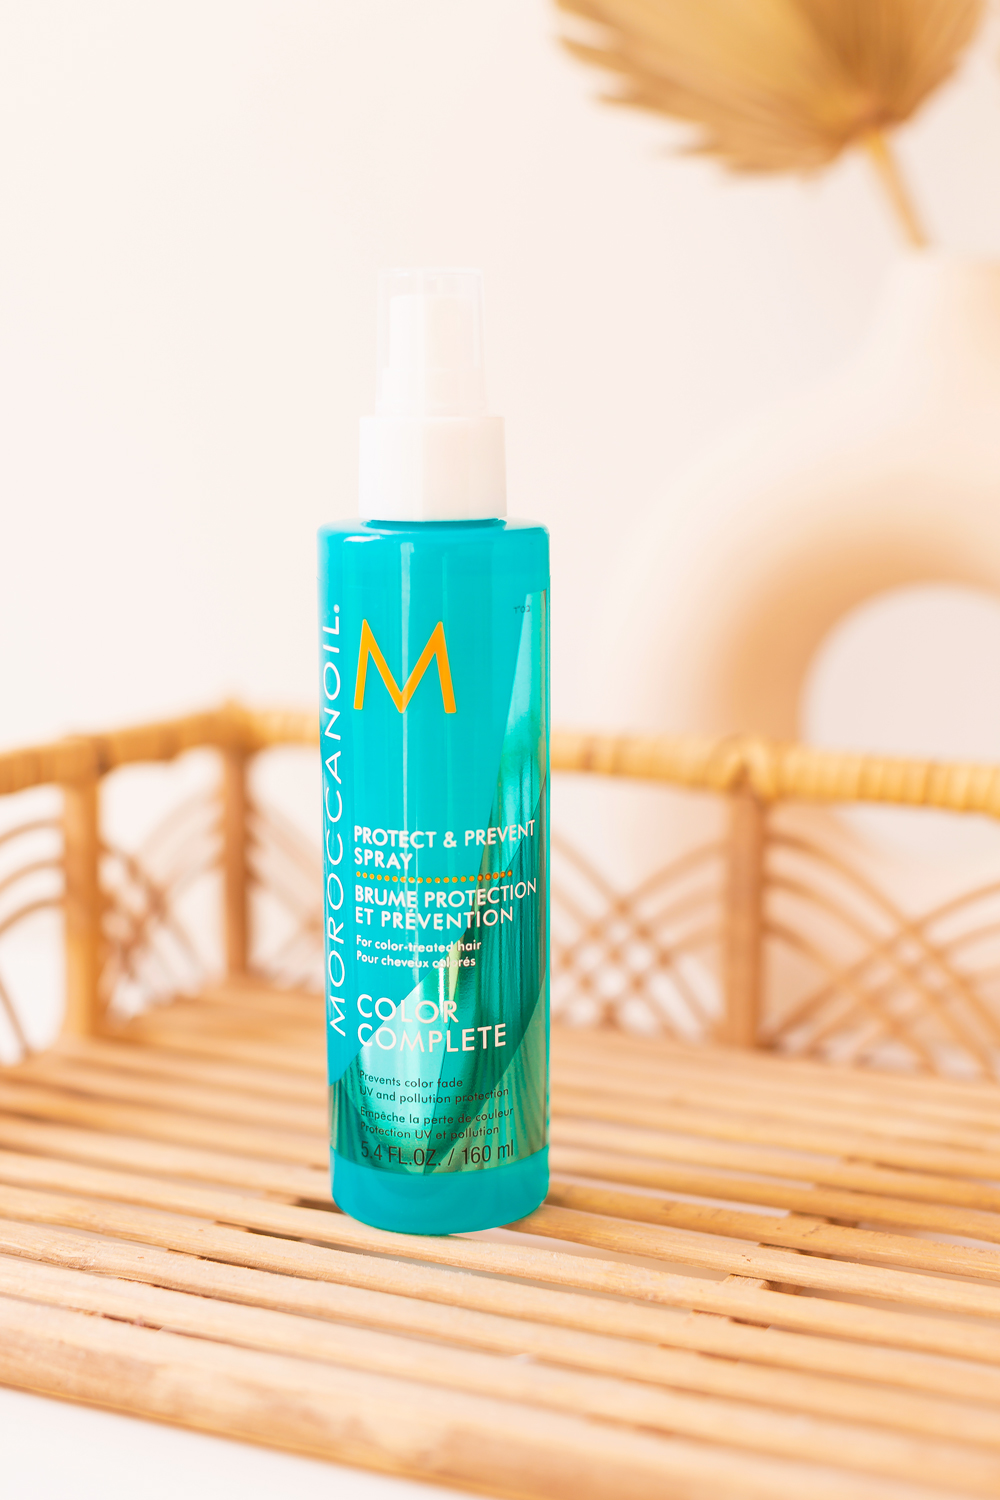 Moroccanoil Protect & Prevent Spray Photos, Review | Teal blue leave-in spray on a boho rattan tray| JustineCelina’s Haircare Routine for Long, Thick, Colour Treated Hair | Color-safe, sulphate free, phosphate free and paragon free haircare routine | MoroccanOil haircare routine | BeautySense review | JustineCelina’s favourite leave-in hair treatments | JustineCelina Hair | Hair growth tips | Hair growth products | Long Hair Secrets | Calgary Beauty Blogger // JustineCelina.com